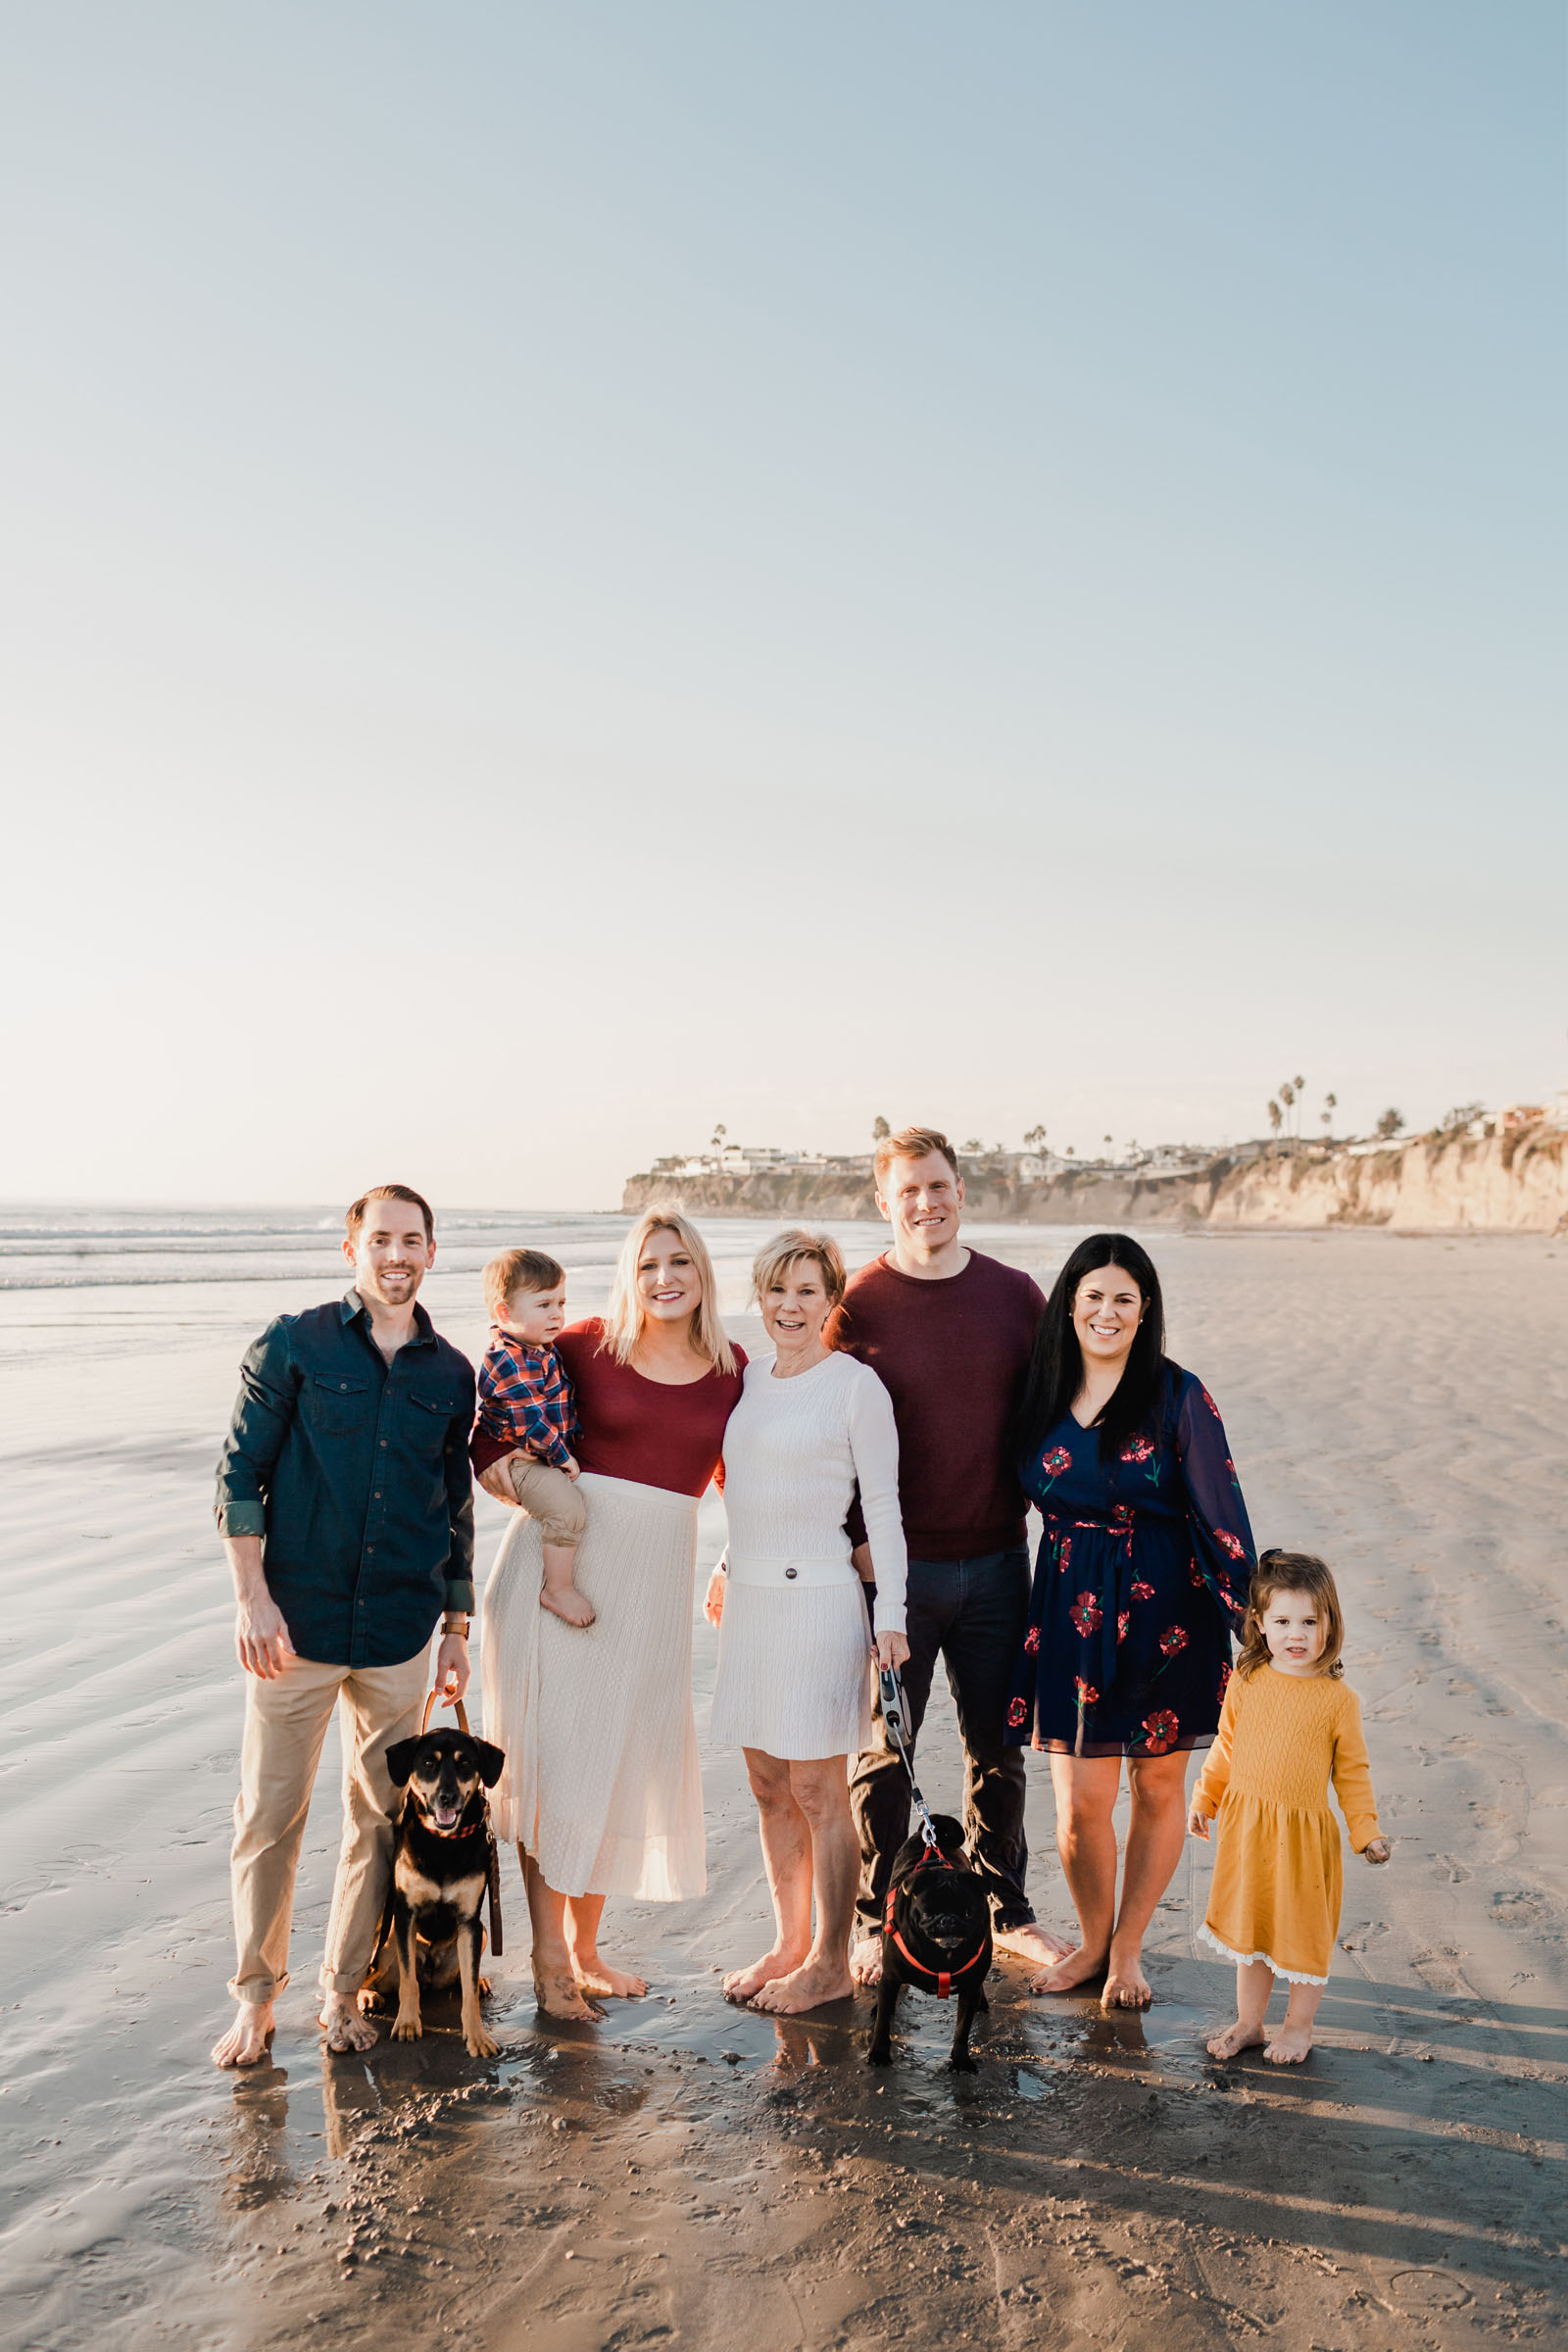 Extended family pictures on the beach in Pacific Beach with 5 adults, 2 kids and 2 dogs